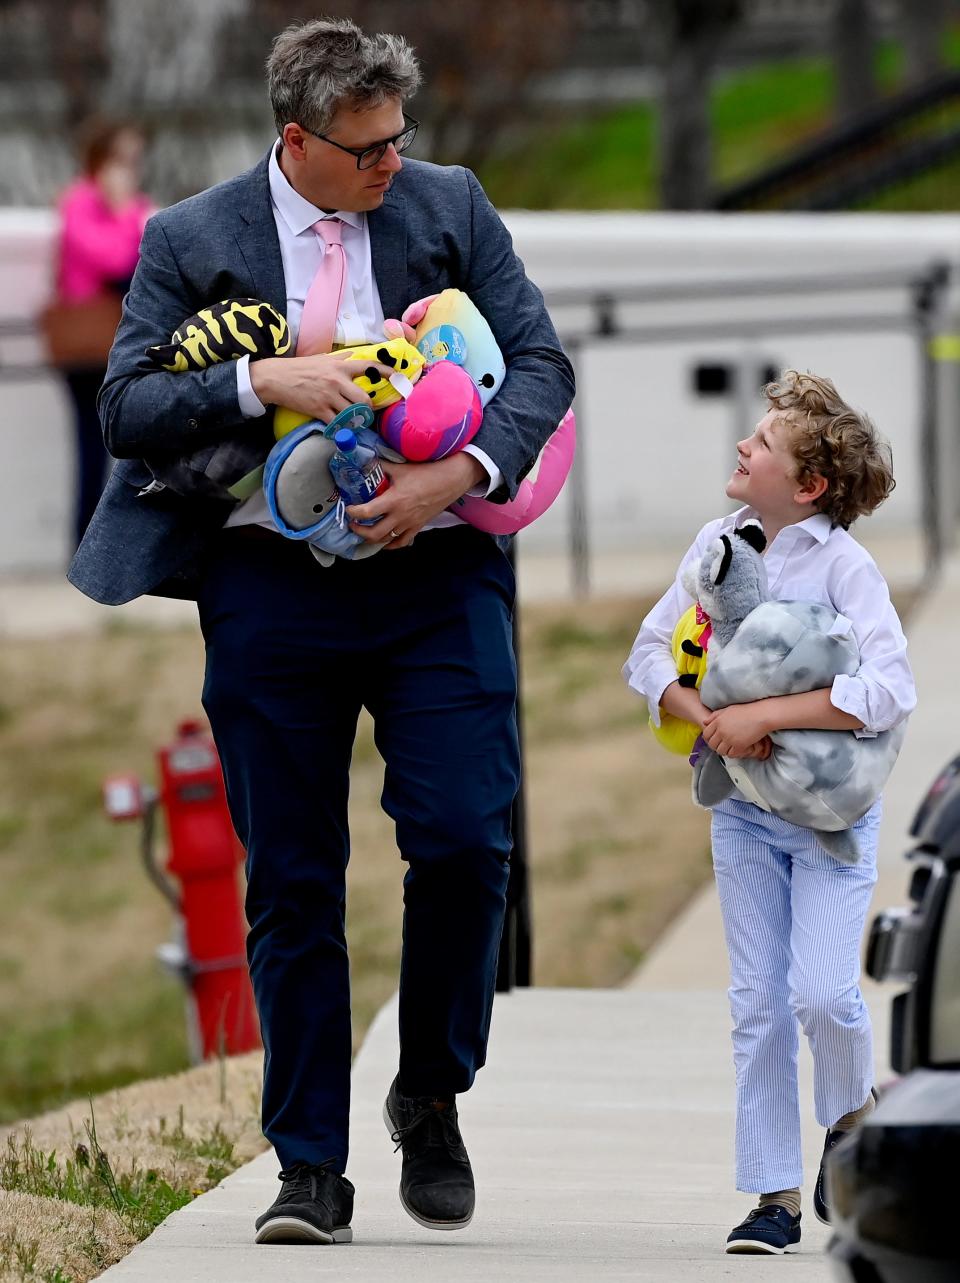 Friends of the family leave after the funeral of Covenant School student Evelyn Dieckhaus, 9, on March 31, 2023, in Nashville, Tenn.